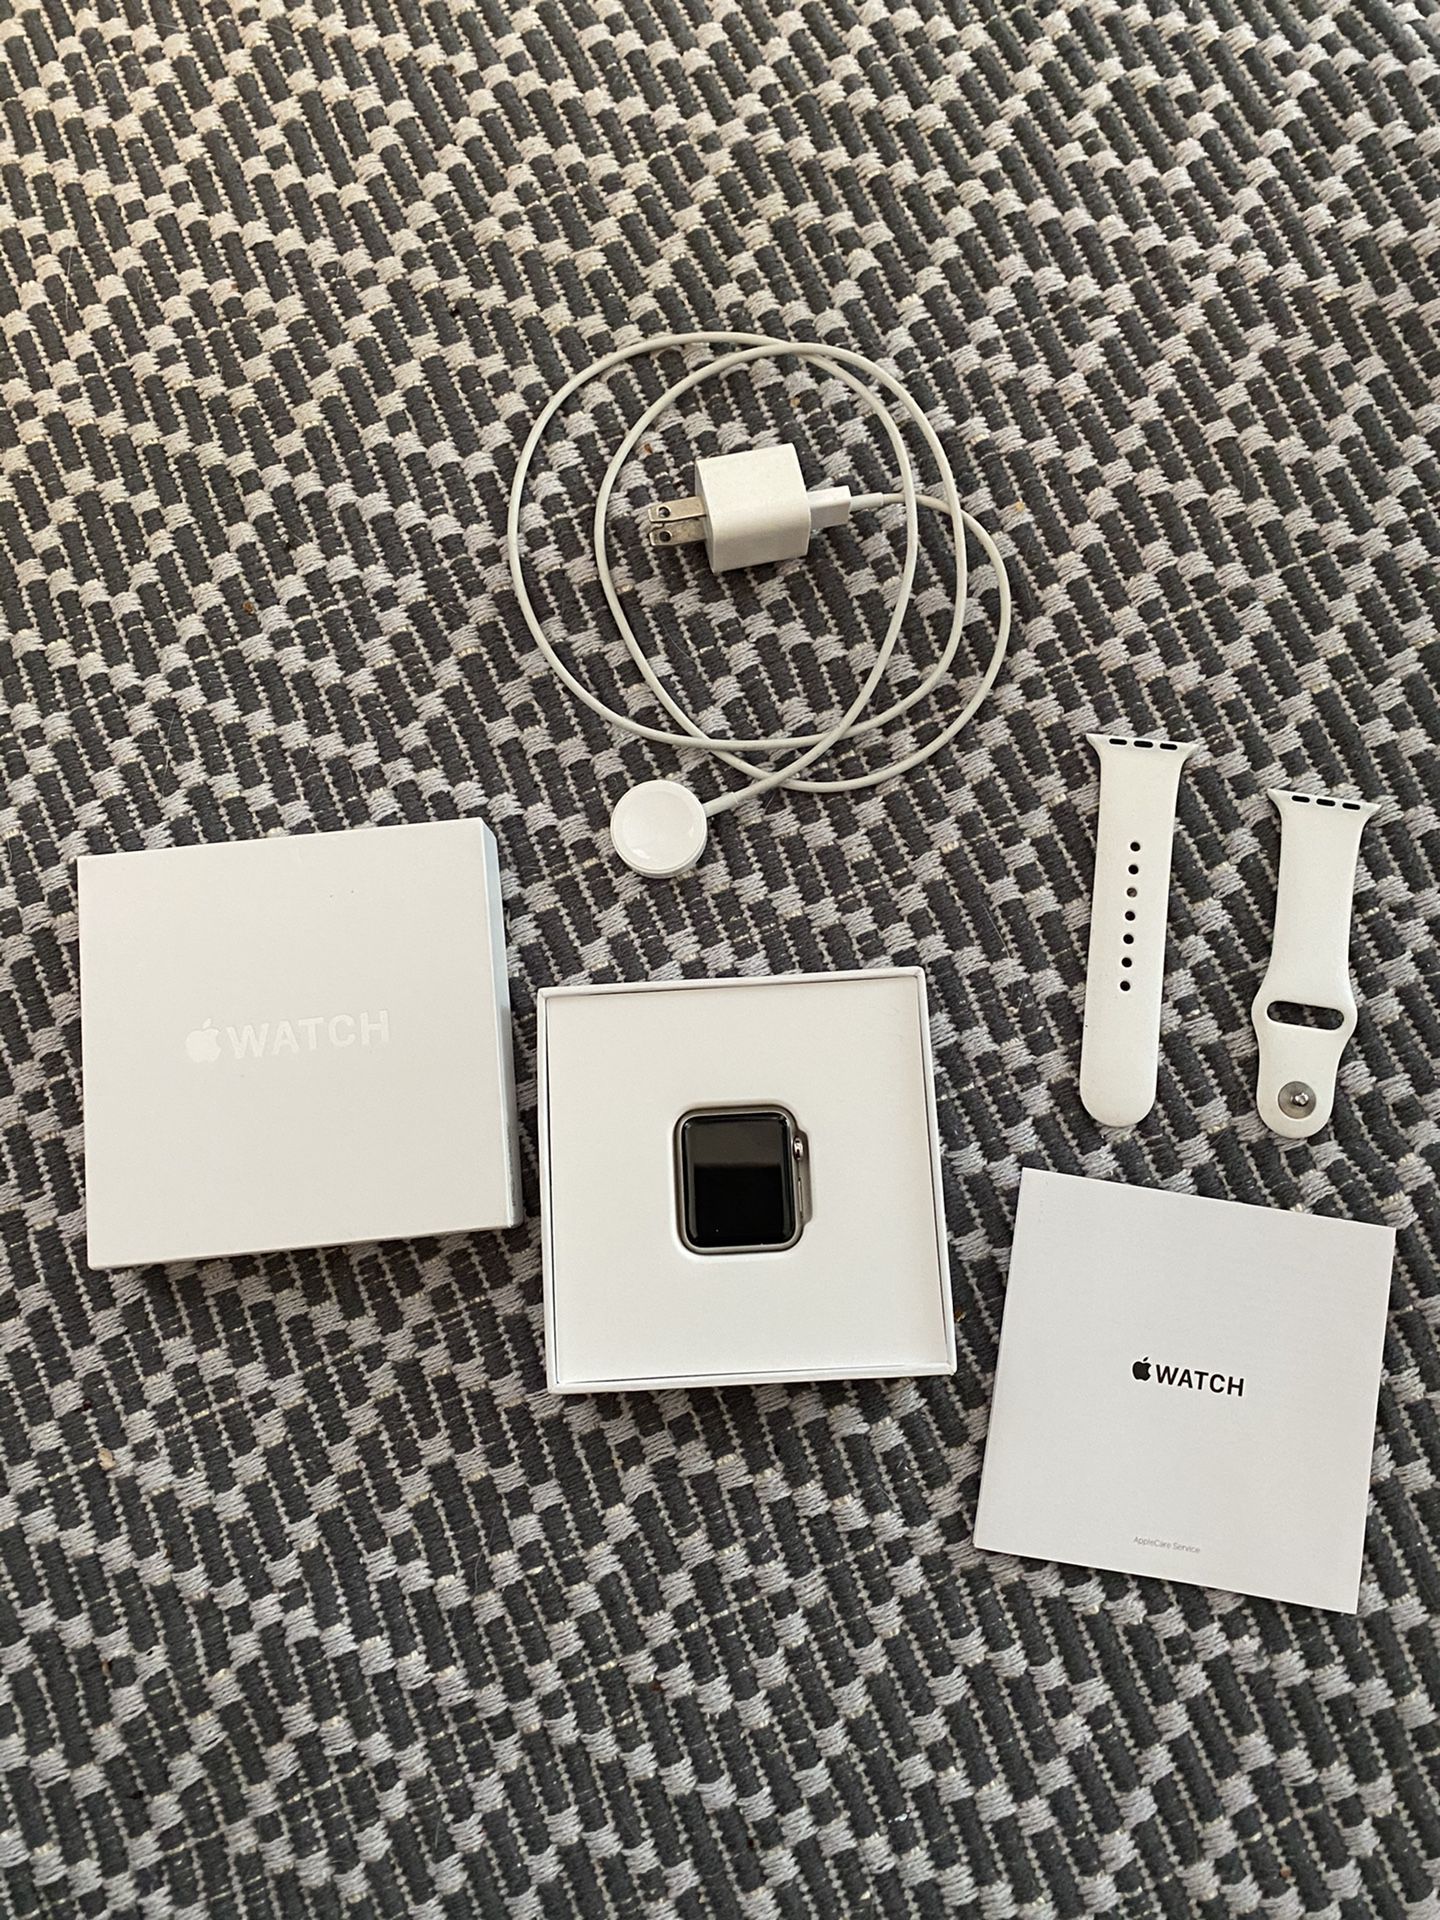 Apple Watch Series 1 (everything included)